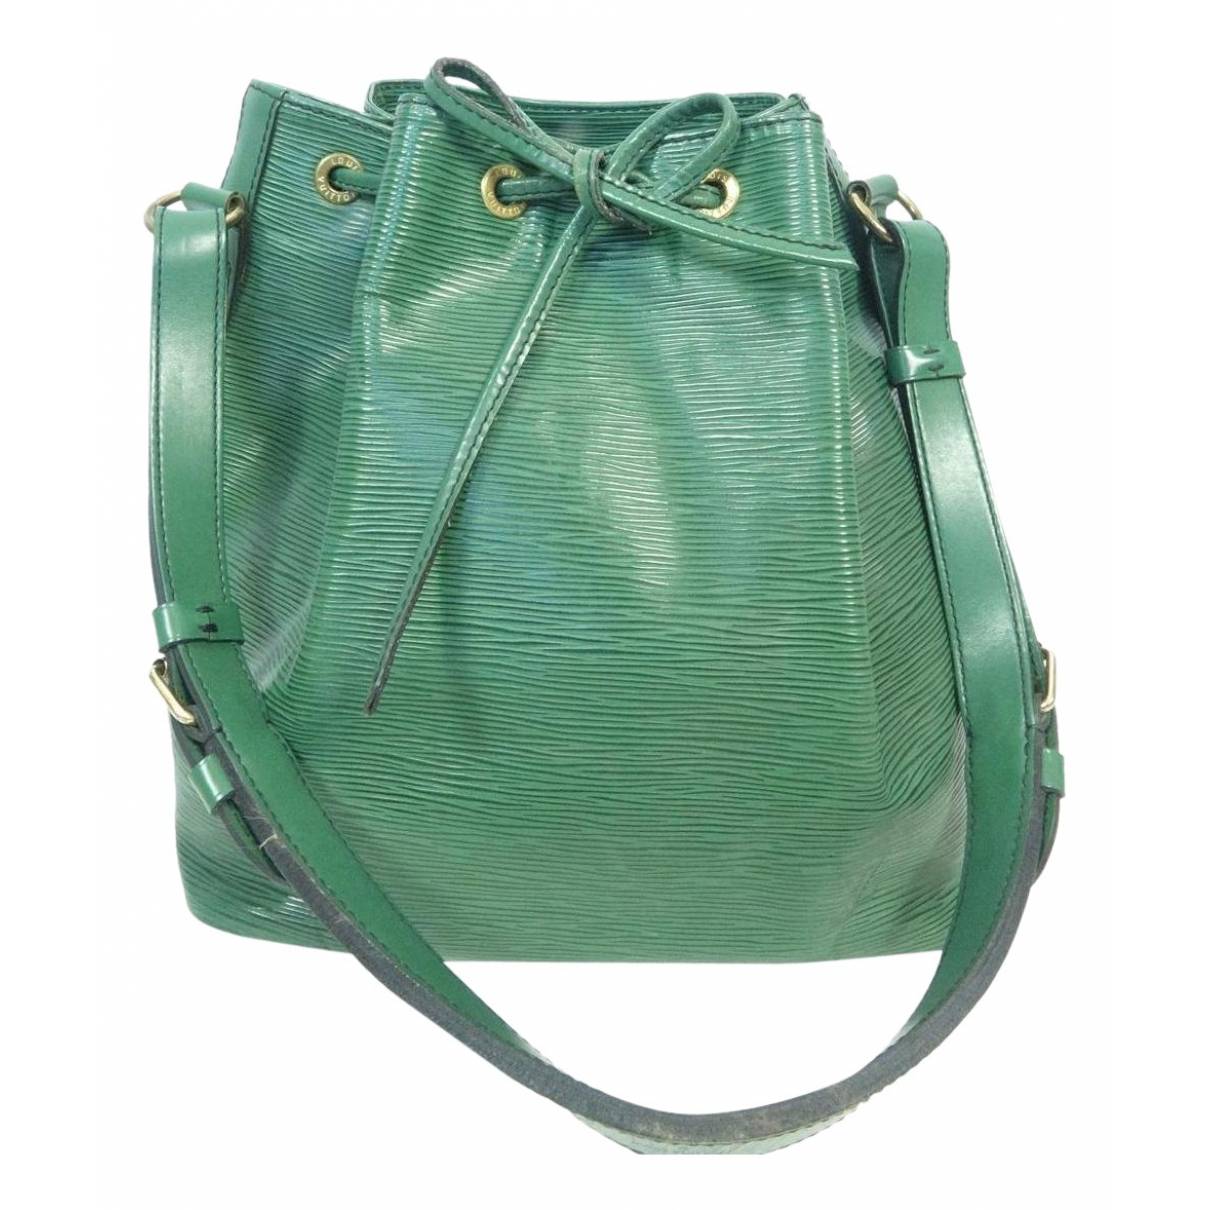 Noé leather handbag Louis Vuitton Green in Leather - 24969905